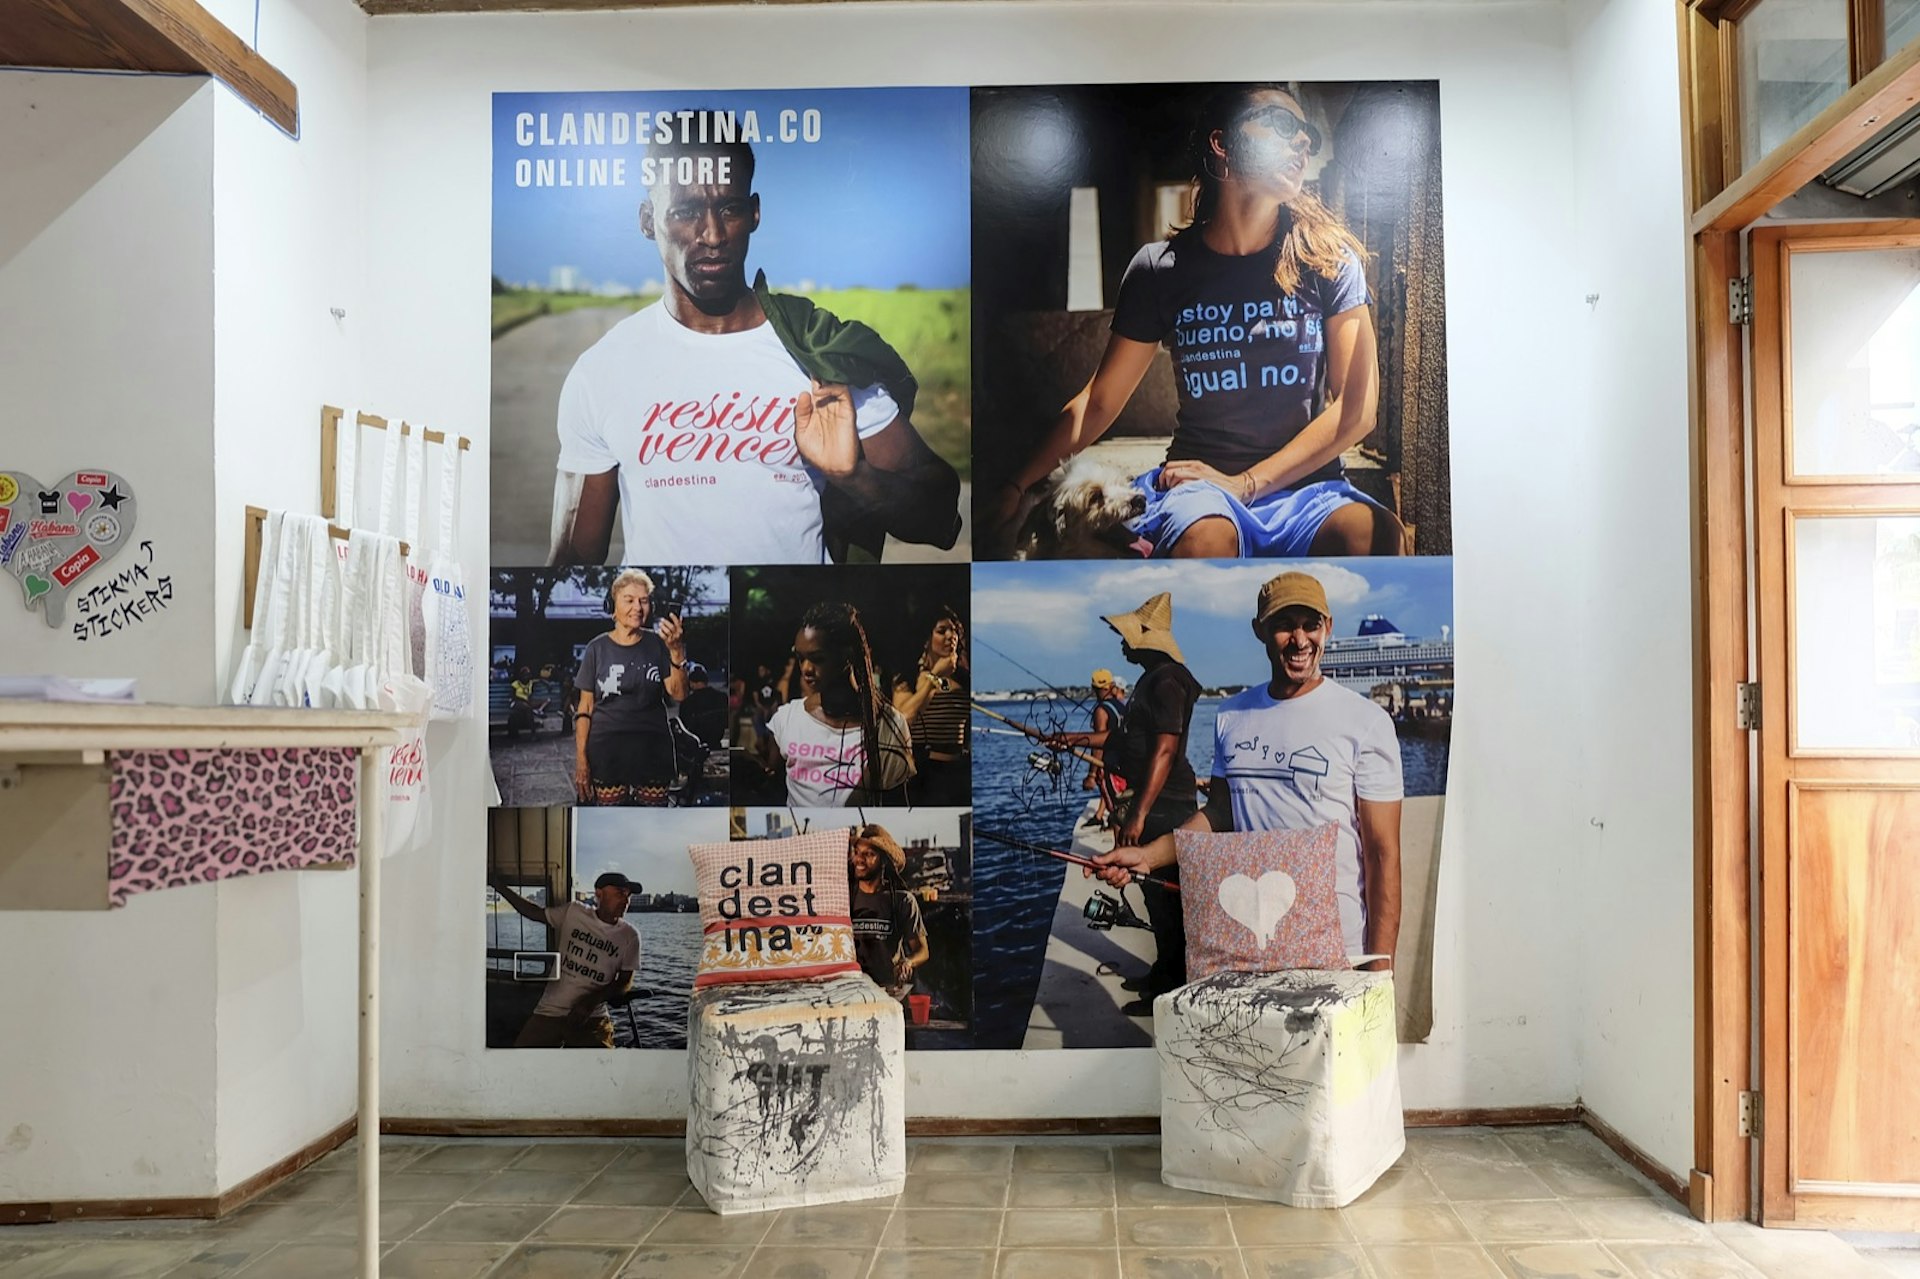 A large wall poster shows models wearing Clandestina t-shirts. In front of the poster are a pair of cushions with pillows on top. A row of canvas bags hang on a wall to the left. Shopping in Havana has vastly changed over the years